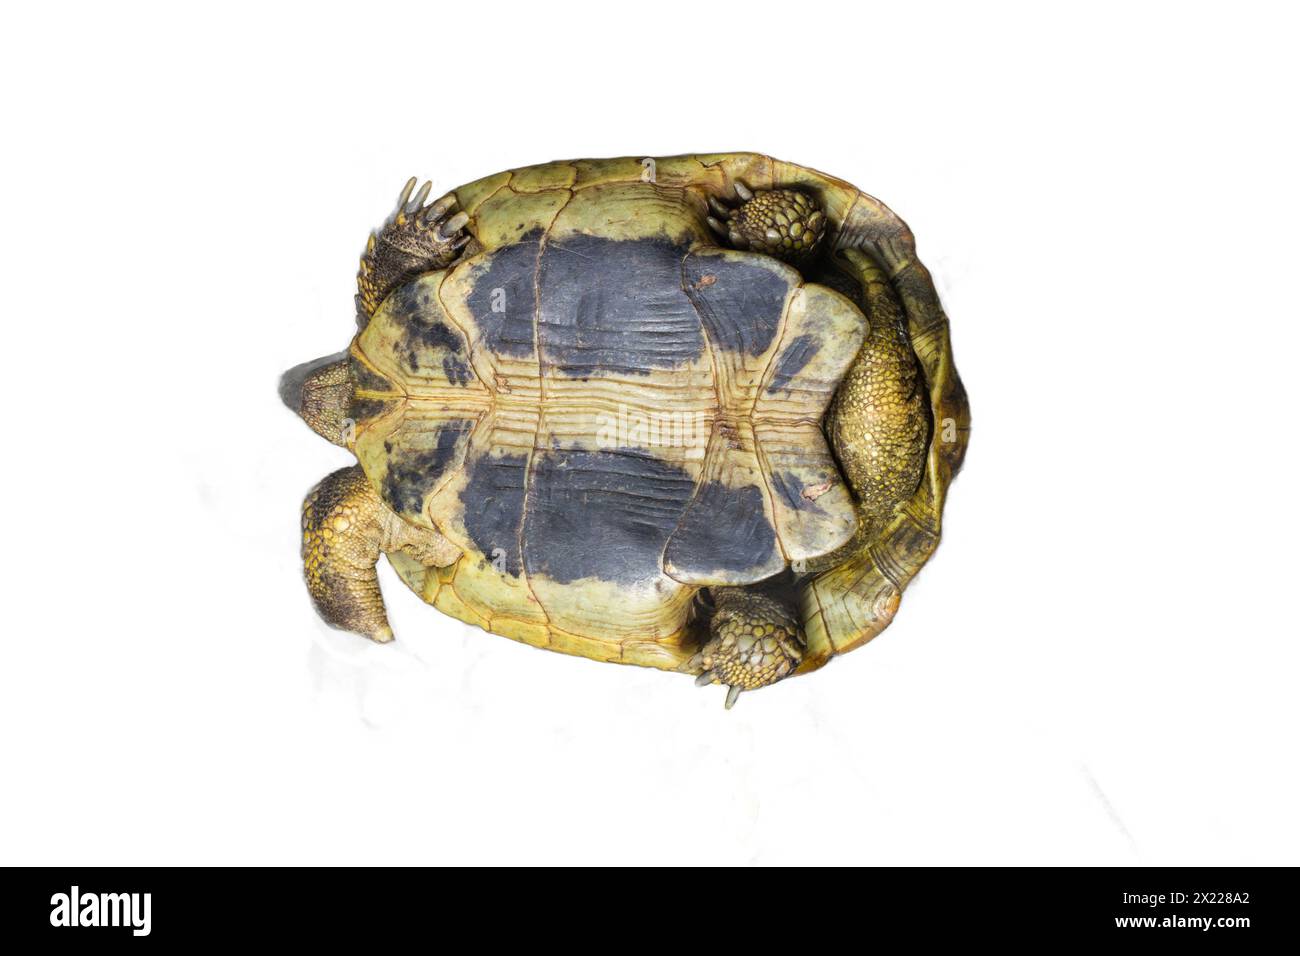 The underside of a tortoise isolated on a transparent background. Ideal for educational illustrations, zoology projects, and wildlife designs. Stock Photo